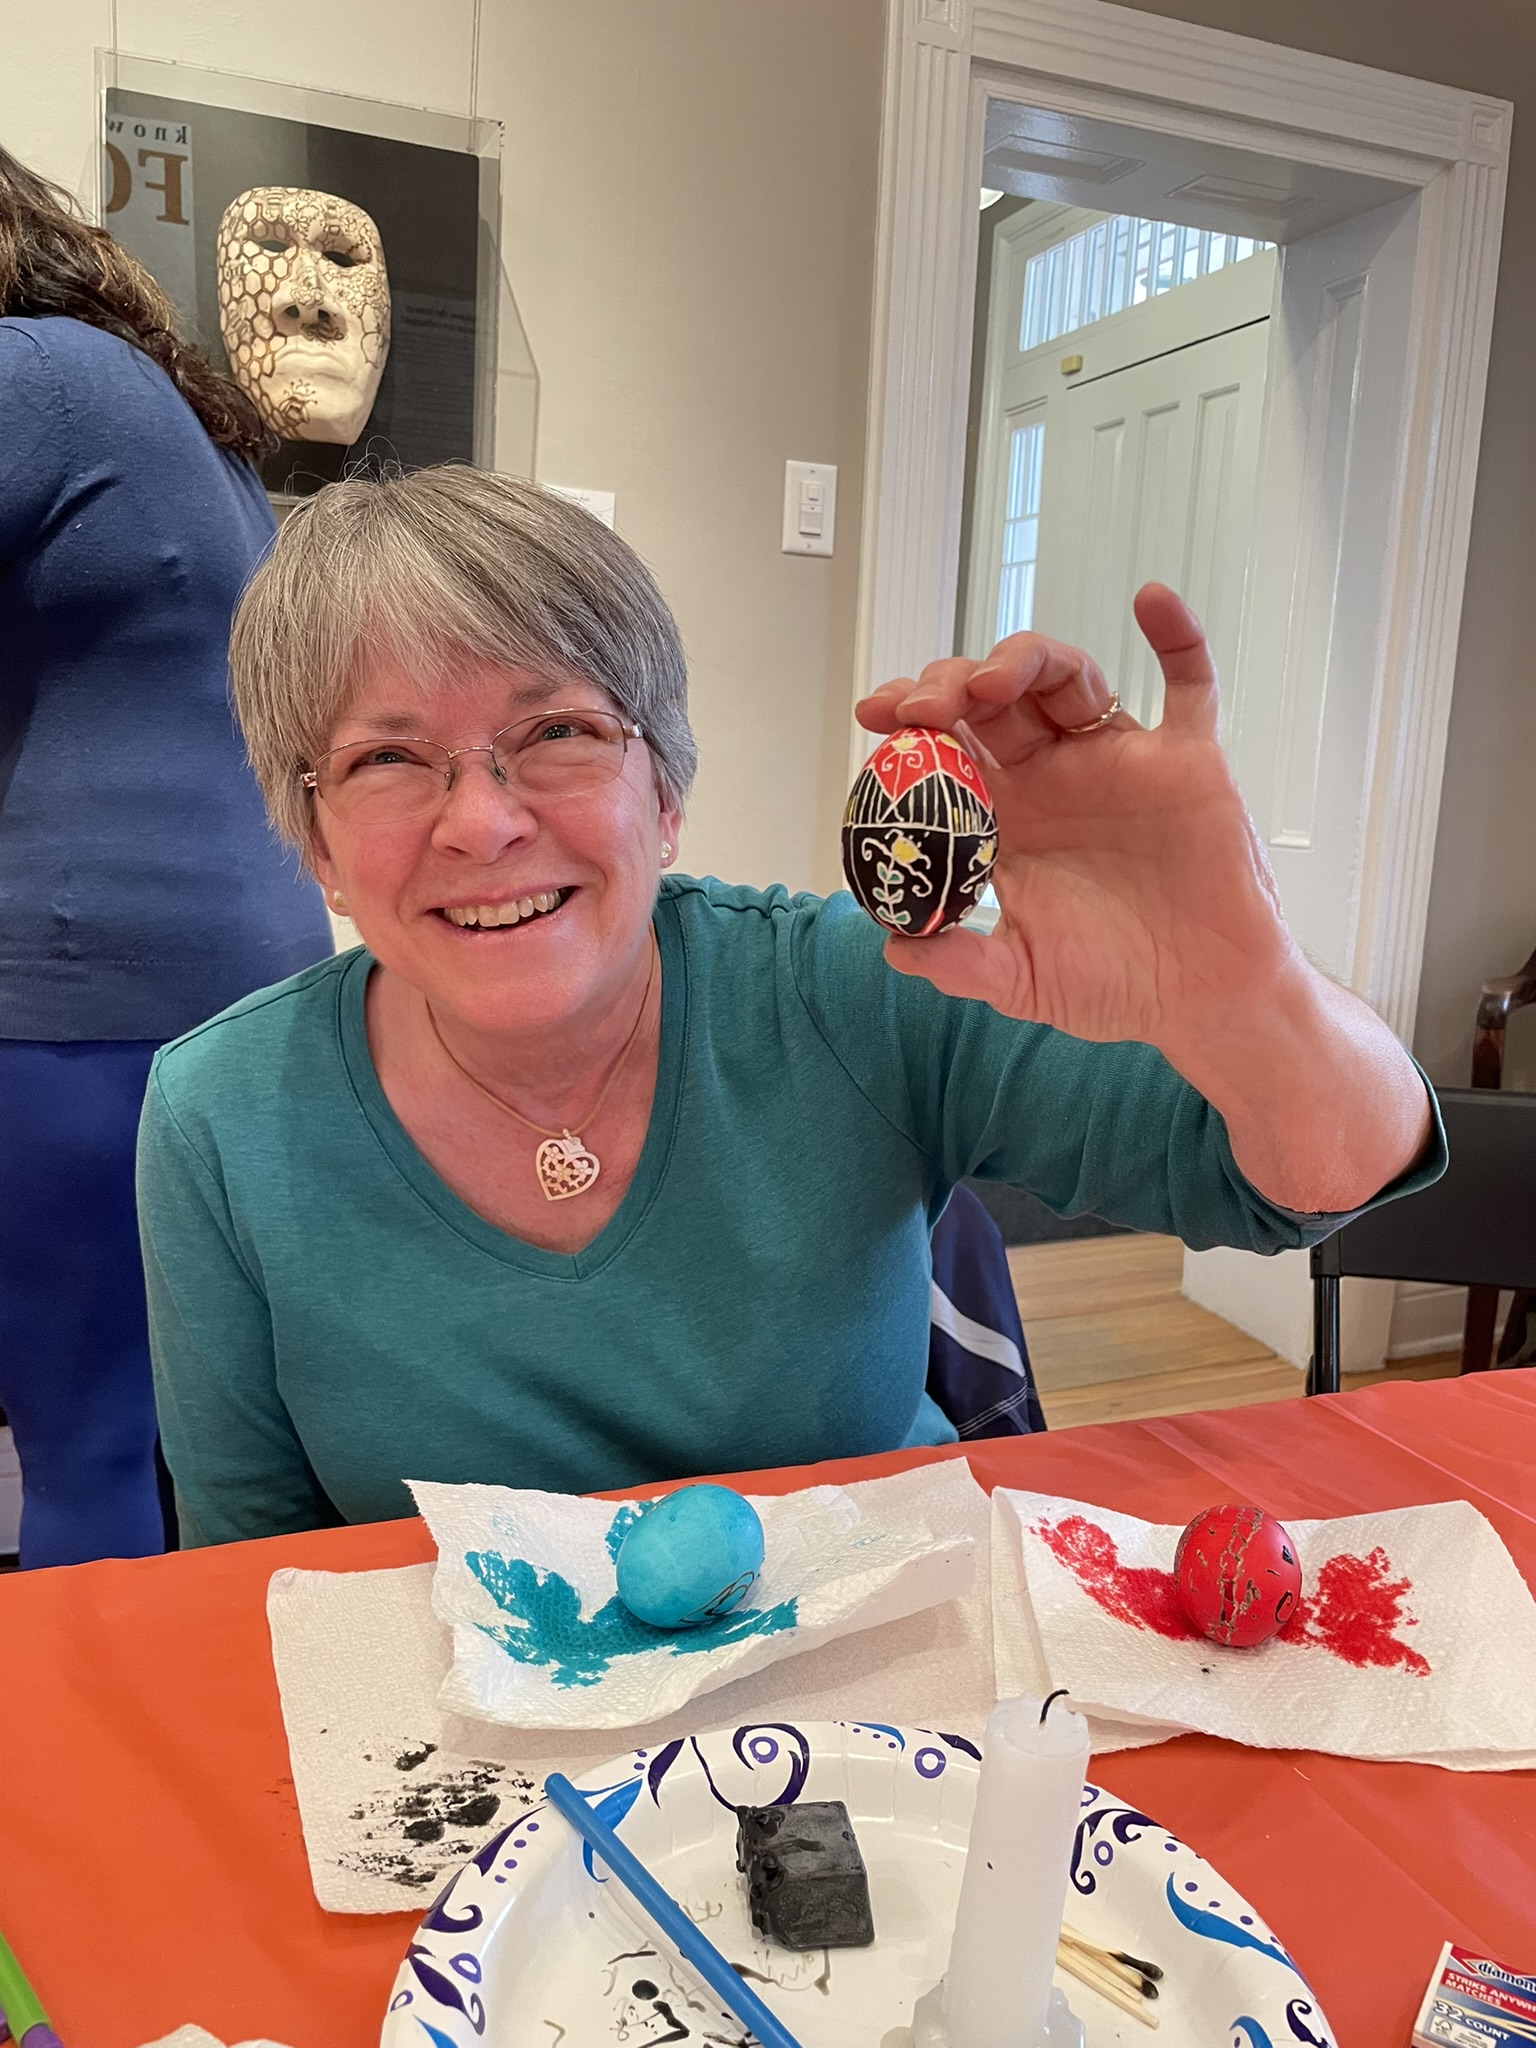 Smiling woman holds up her decorated egg, supplies on table beneath her